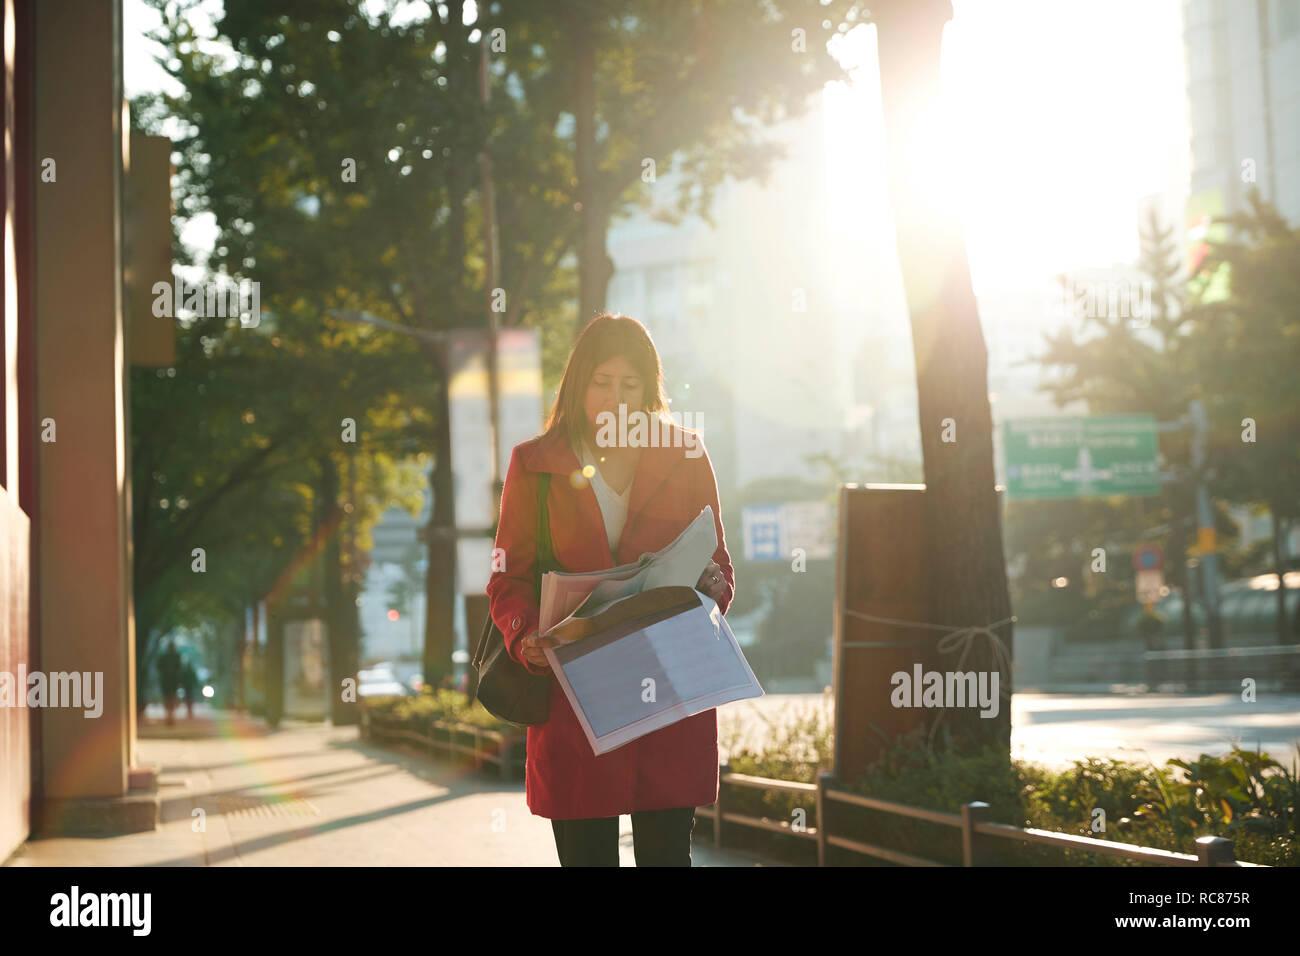 Businesswoman reading newspapers in city, Seoul, South Korea Stock Photo